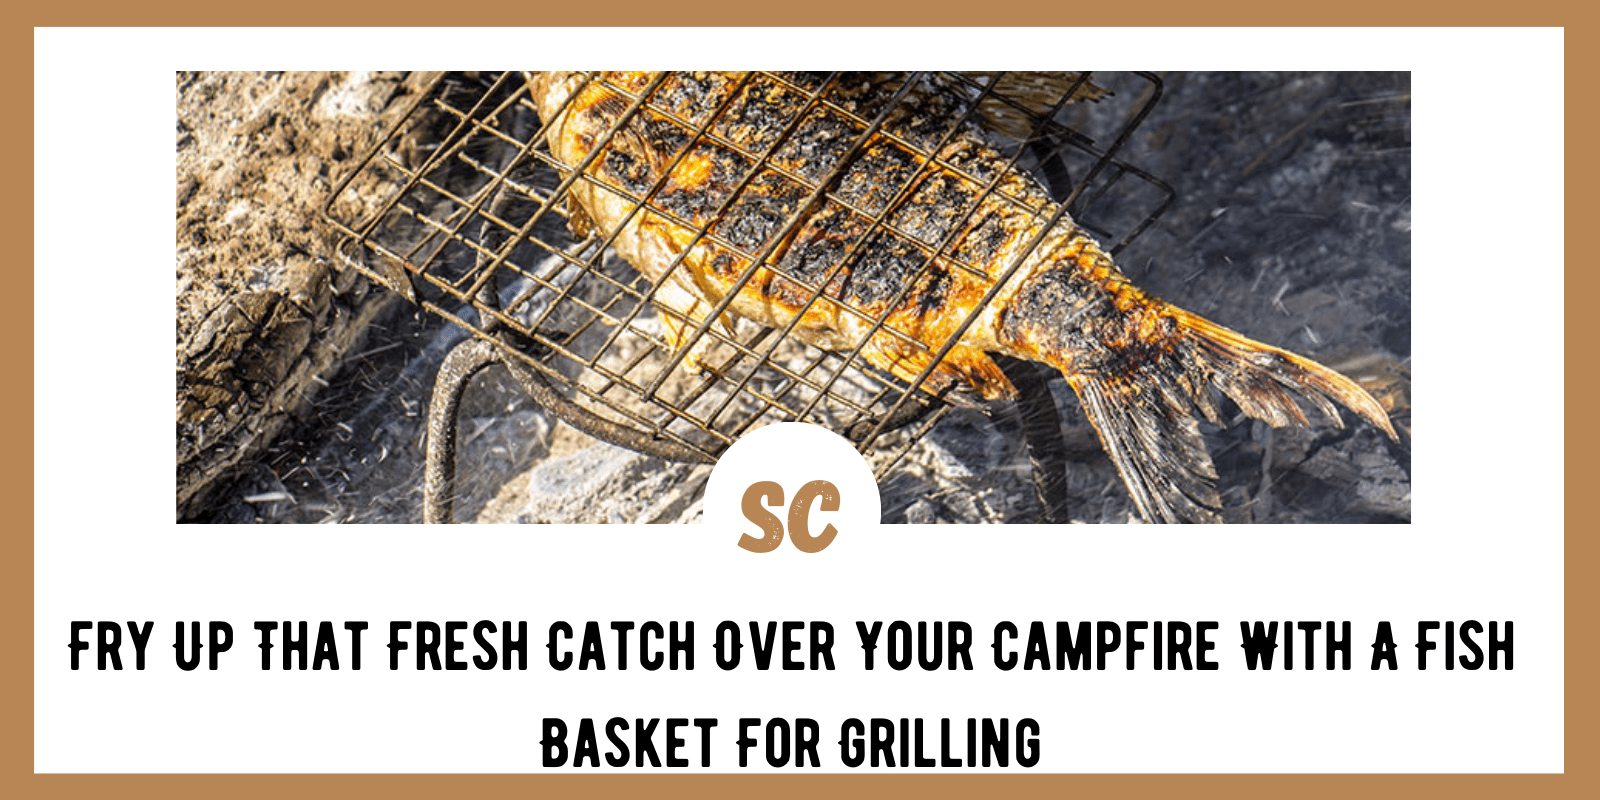 Fry Up That Fresh Catch Over Your Campfire With A Fish Basket For Grilling